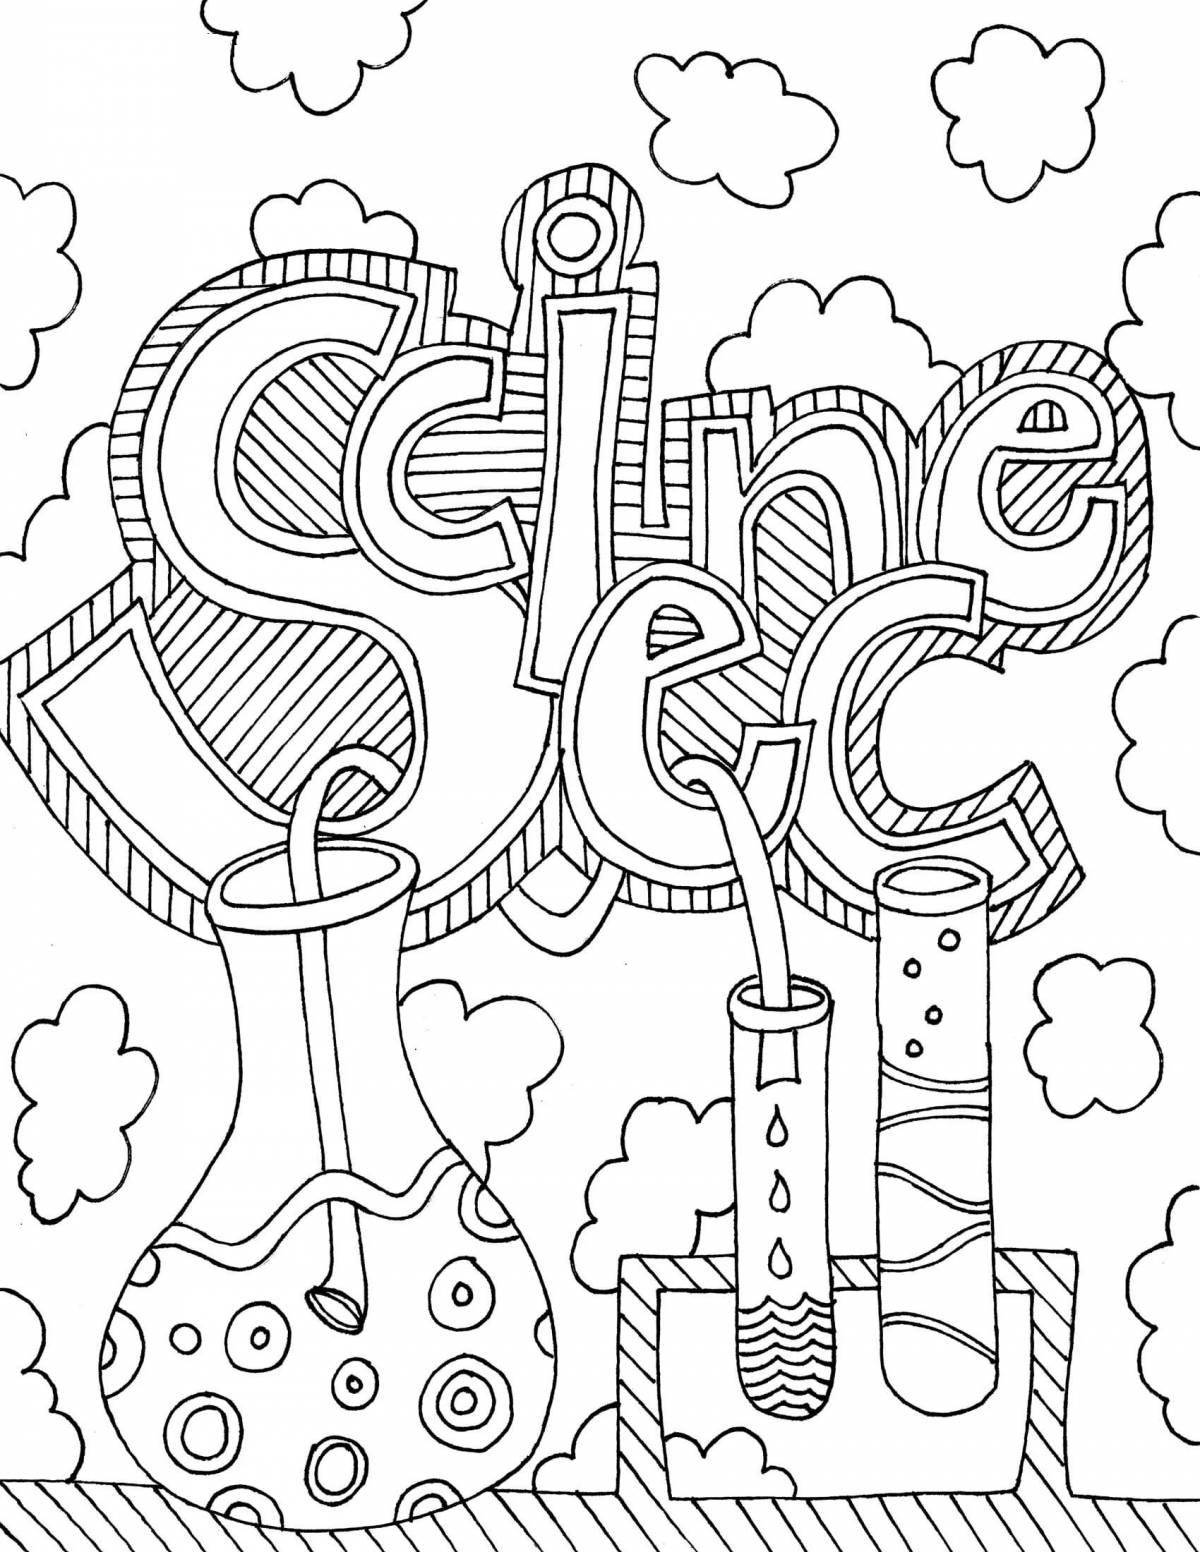 Fancy science coloring book